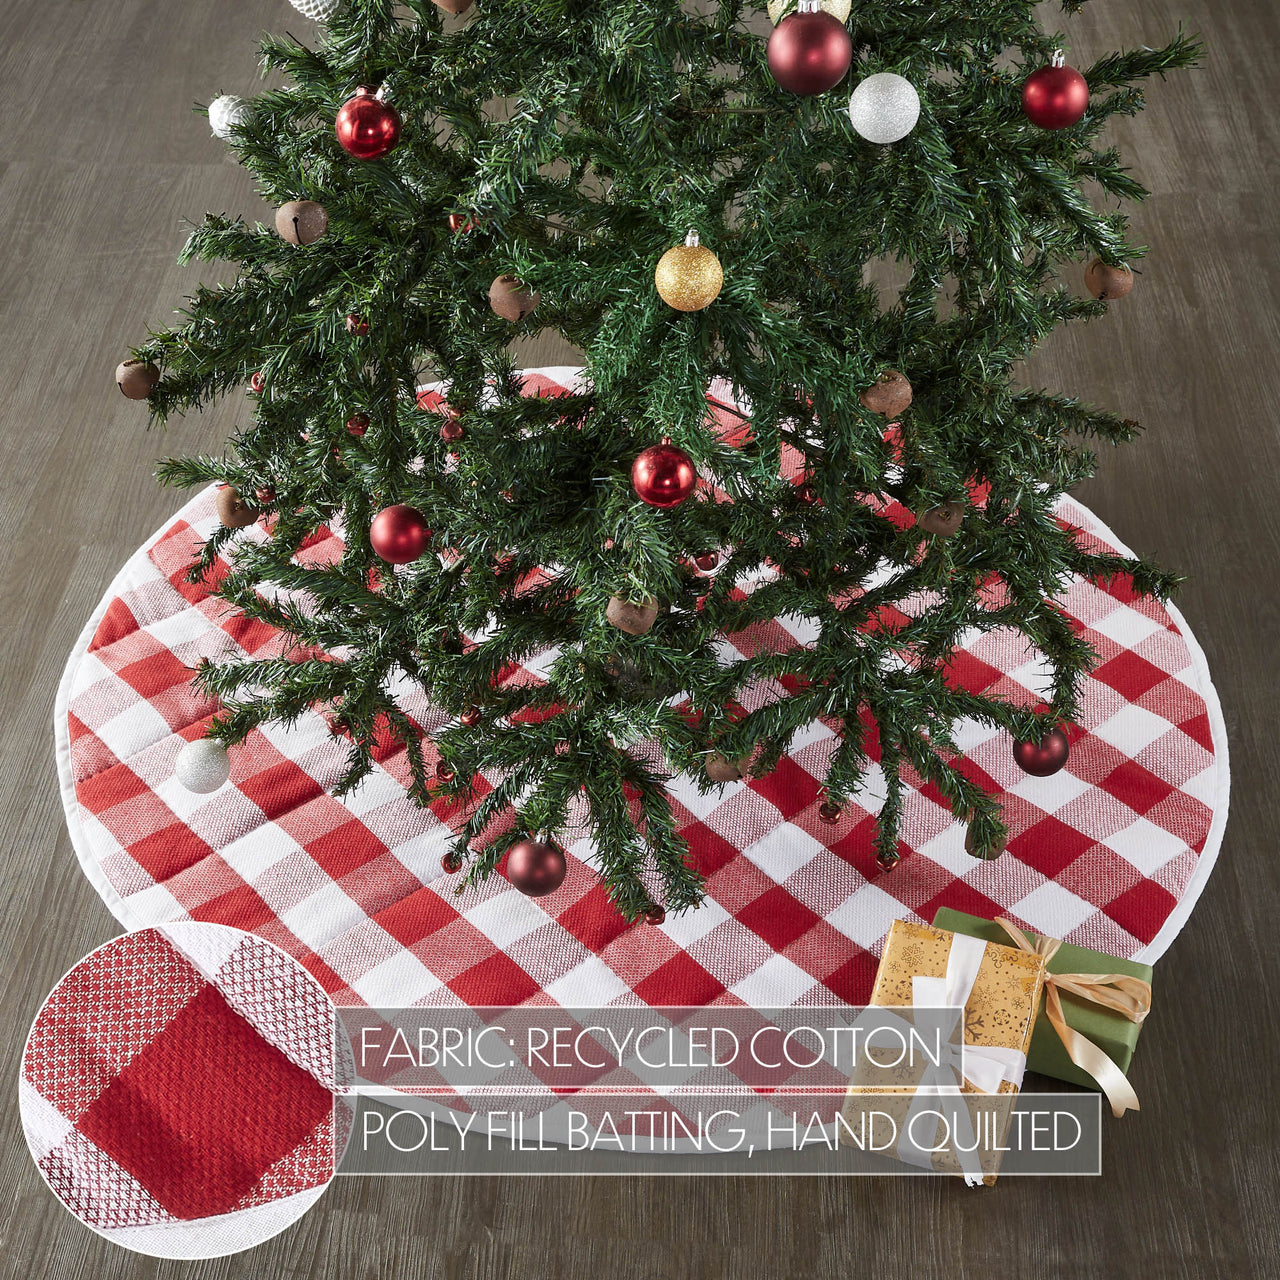 Annie Red Check Tree Skirt 48" VHC Brands